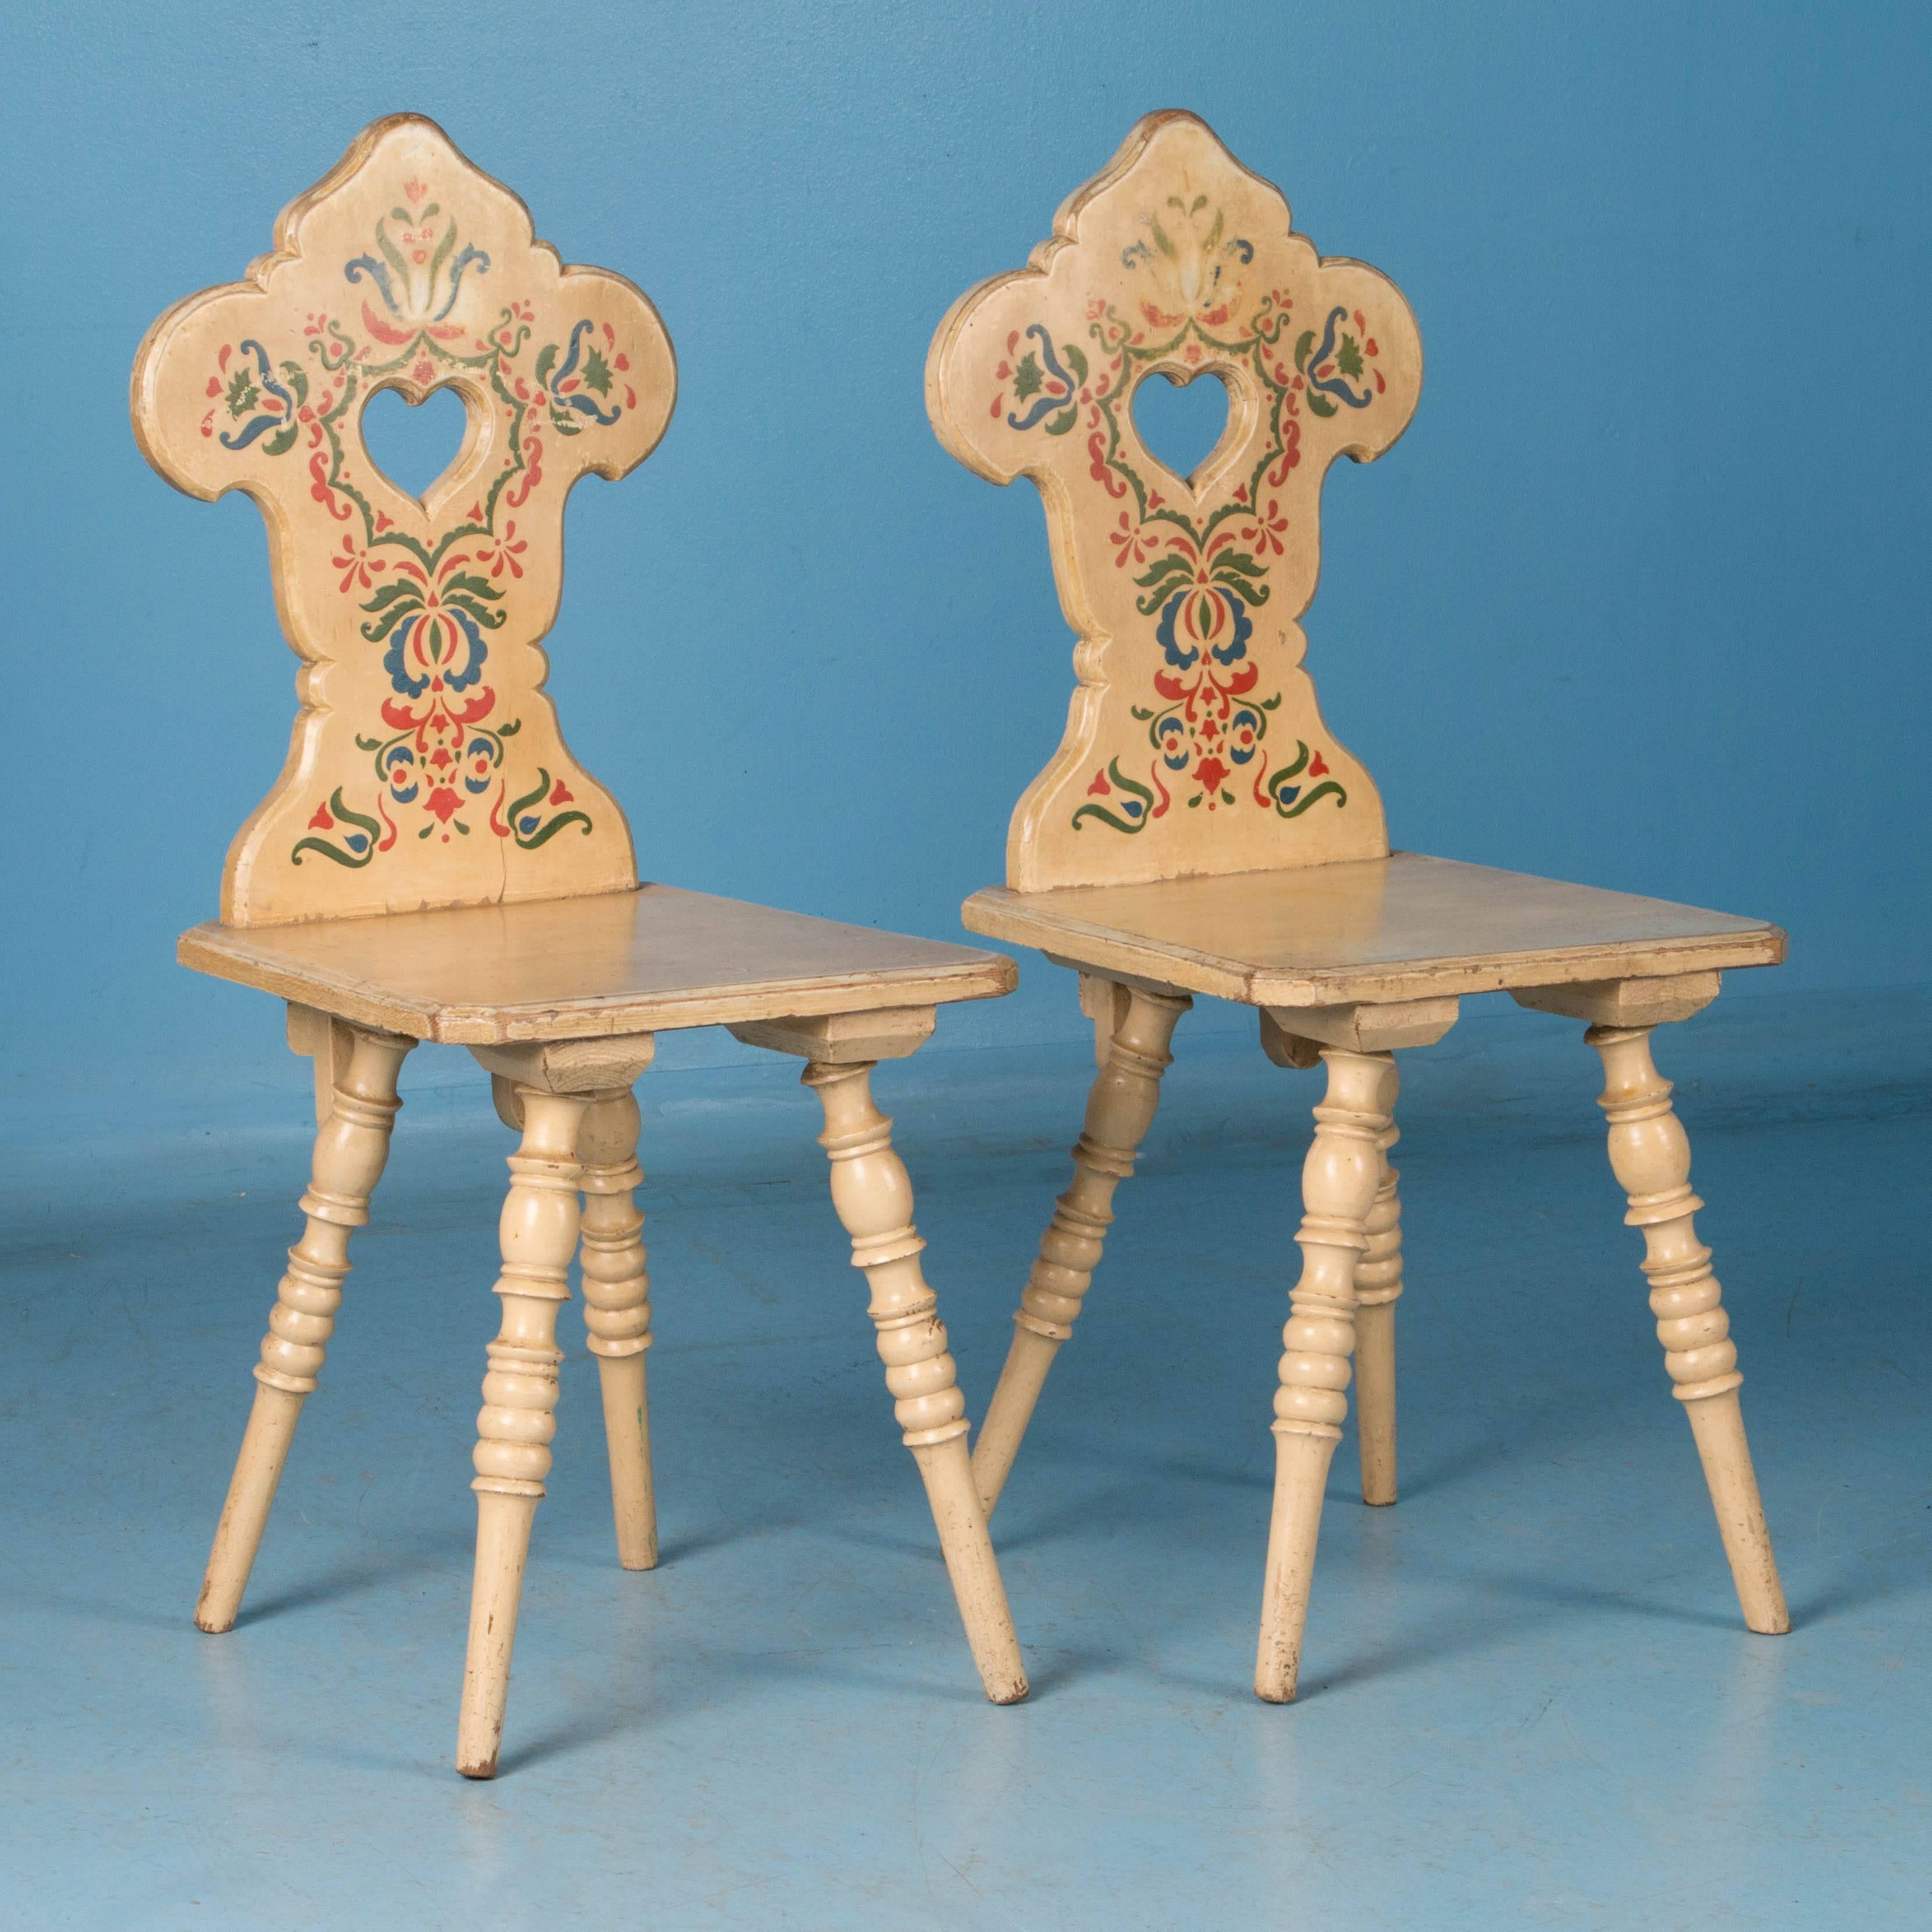 This delightful pair of chairs have a traditional heart shaped cut-out in the back, which brings to mind a quaint Tyrolean cabin in the Austrian hills. The soft yellow is accented by red, blue and green folk art stencil/painted flowers and